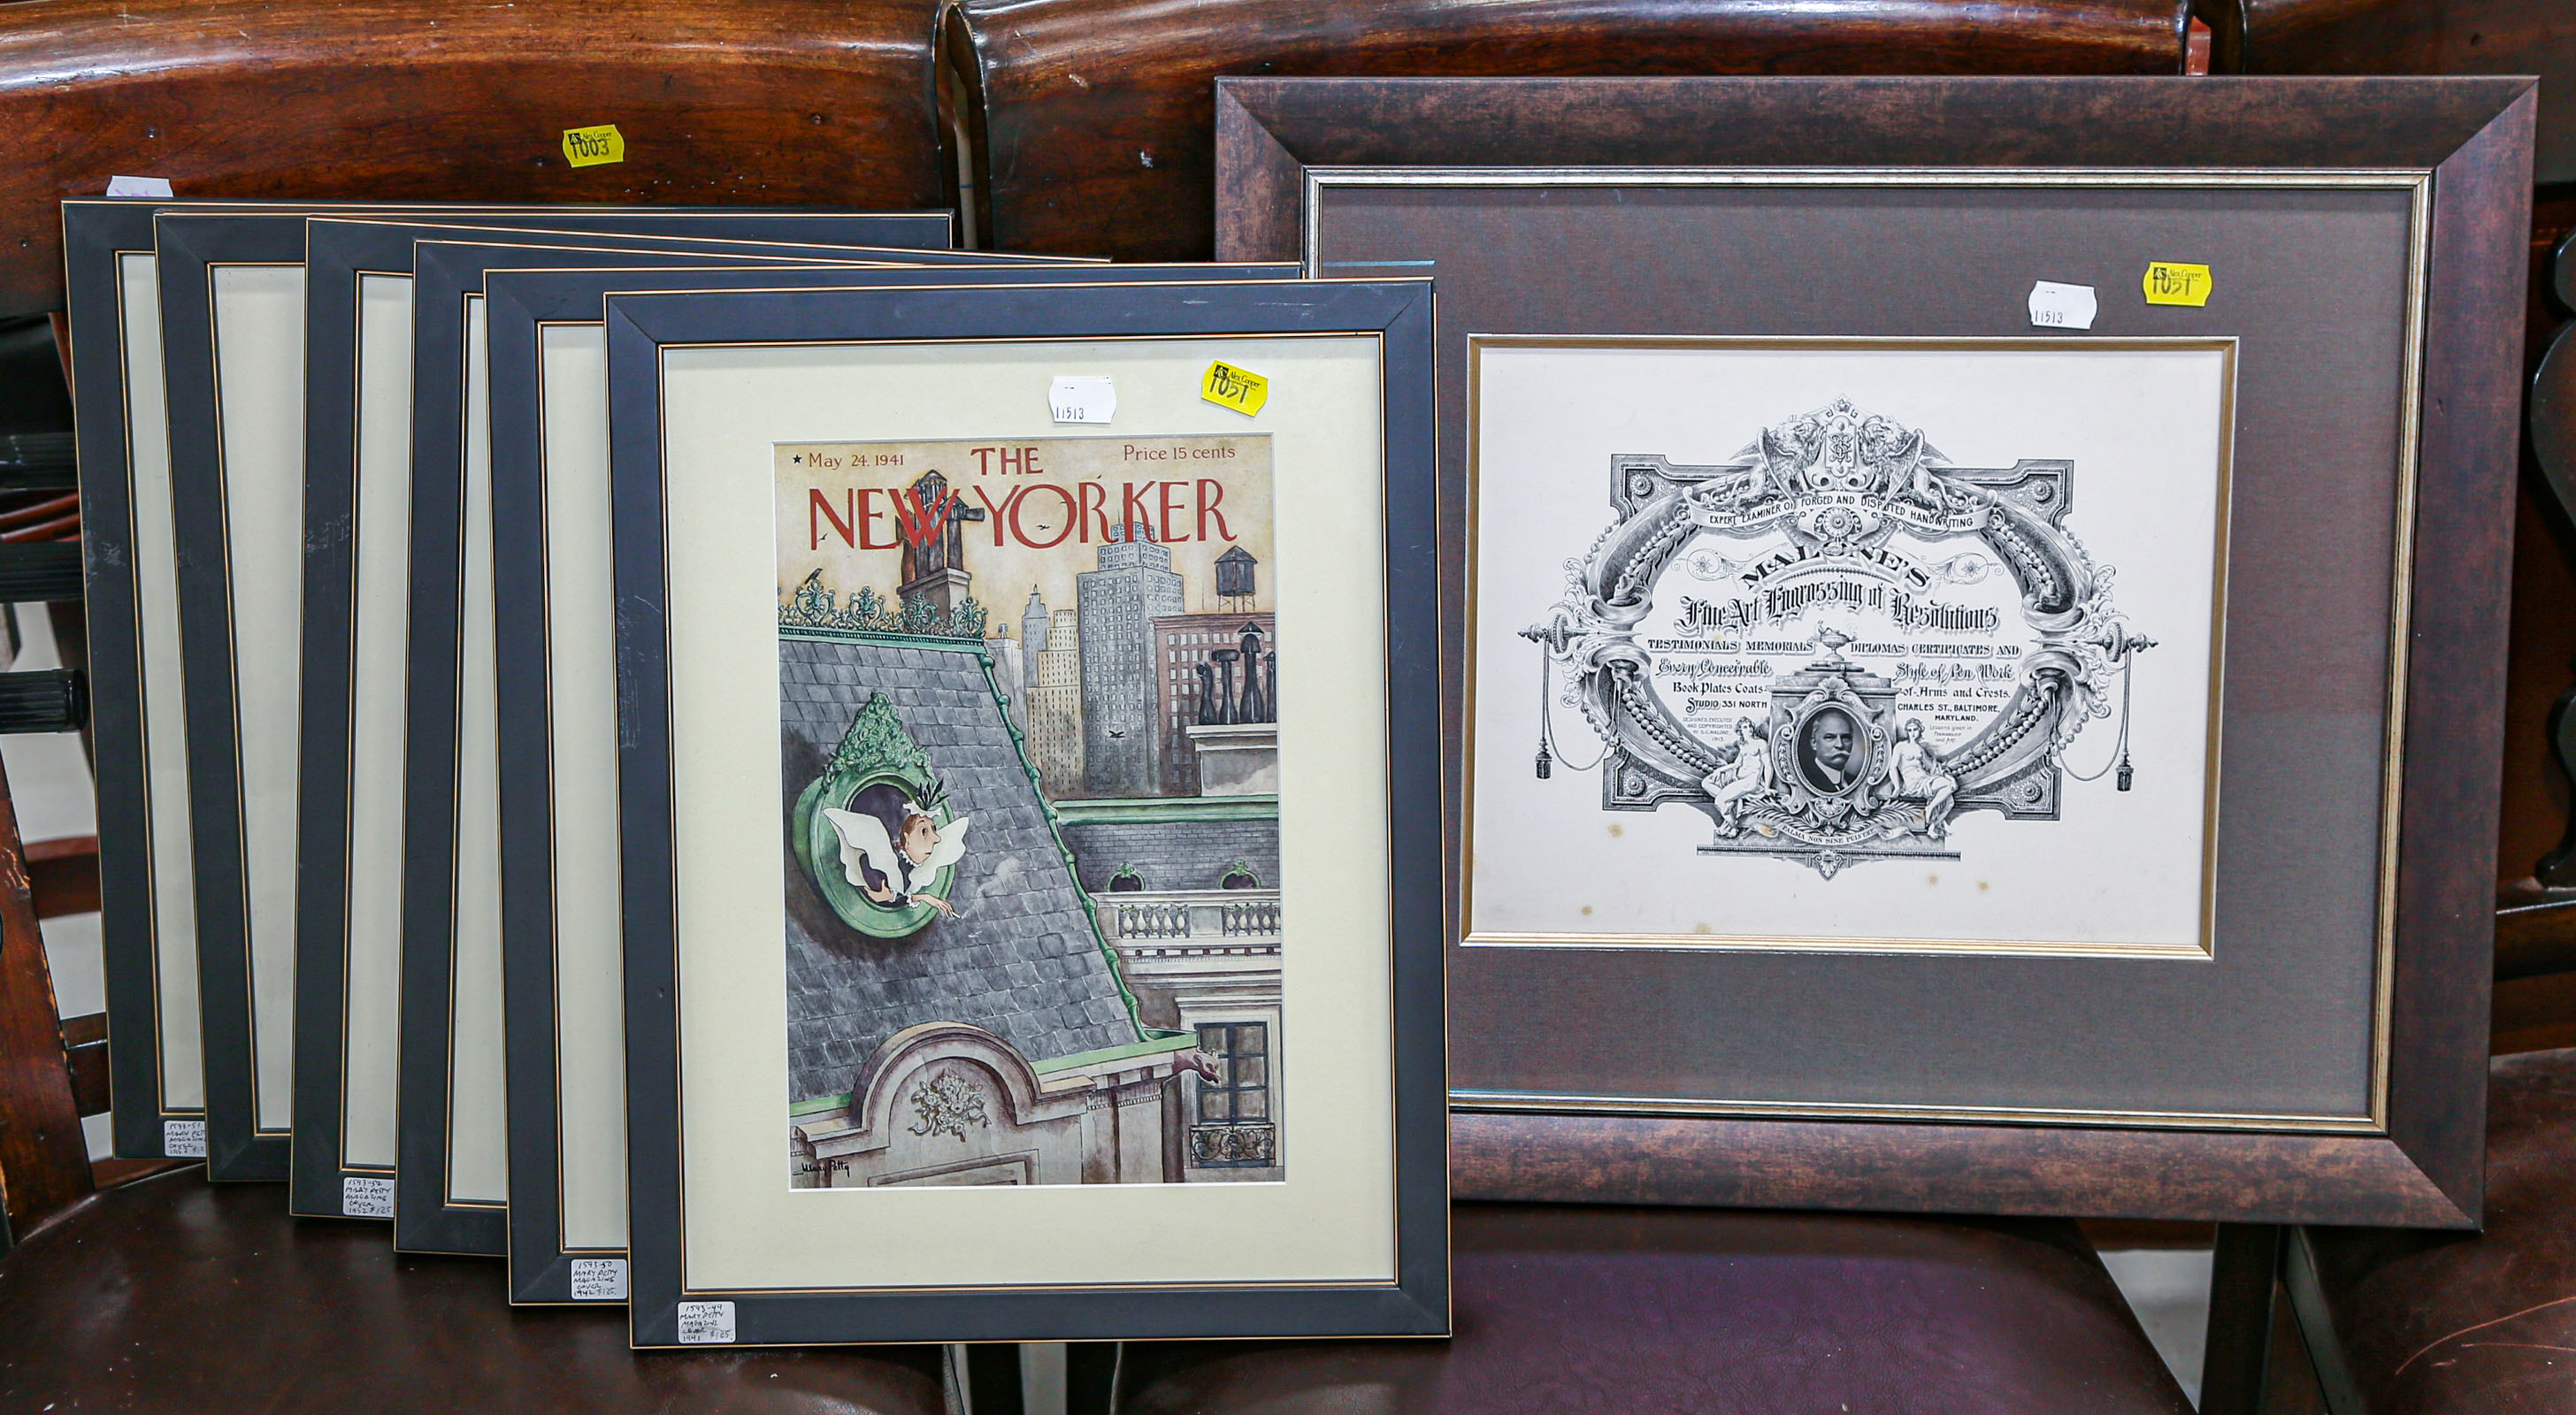 SIX NEW YORKER FRONT COVERS A 36a3bb